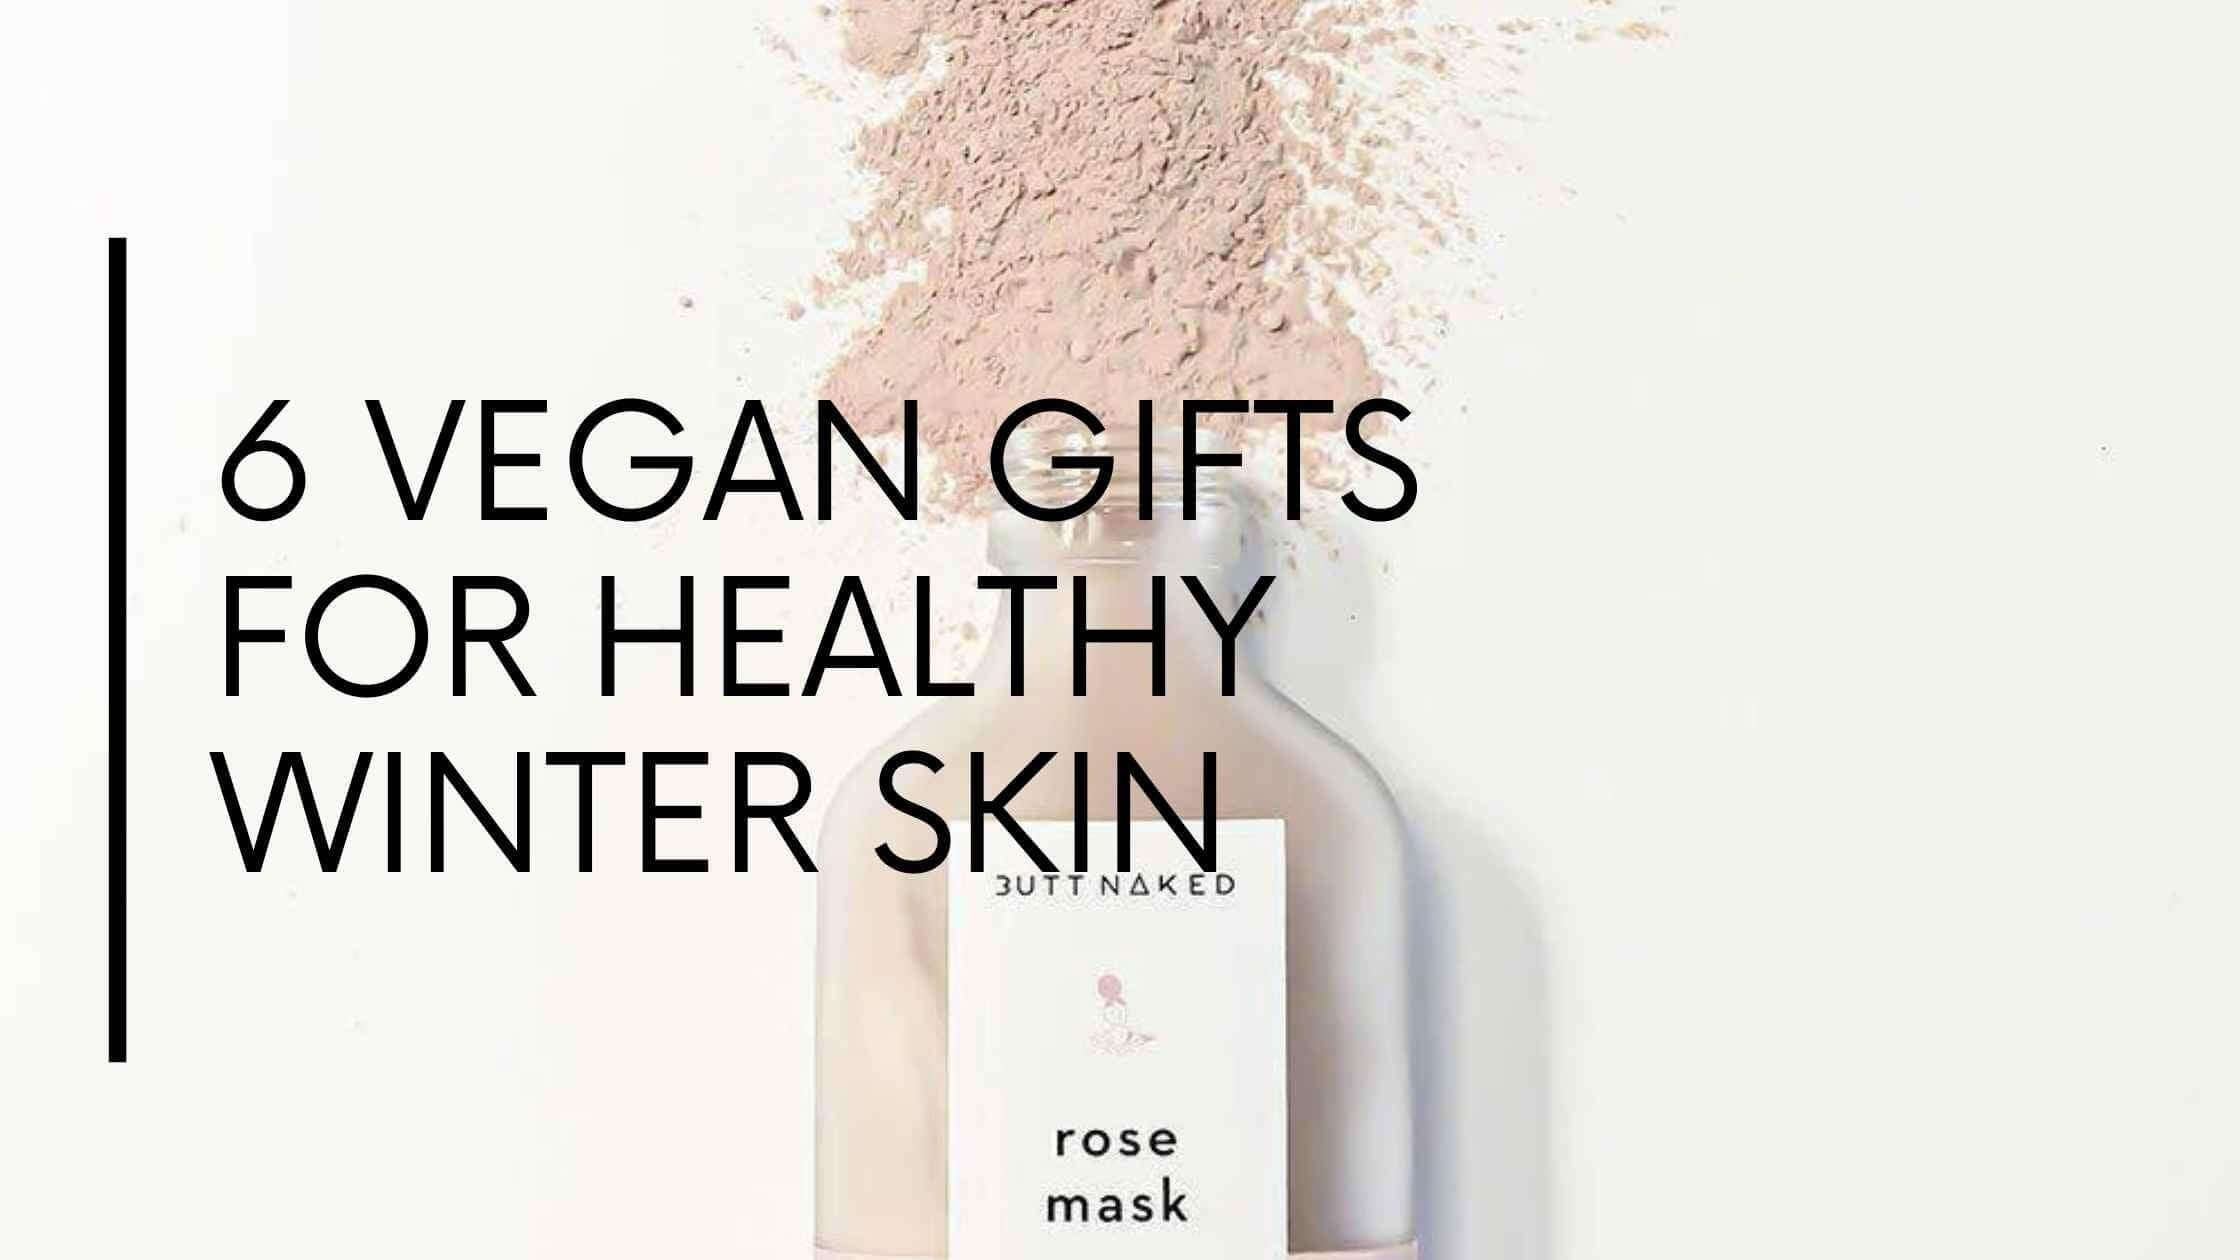 6 Vegan Gifts for Healthy Winter Skin